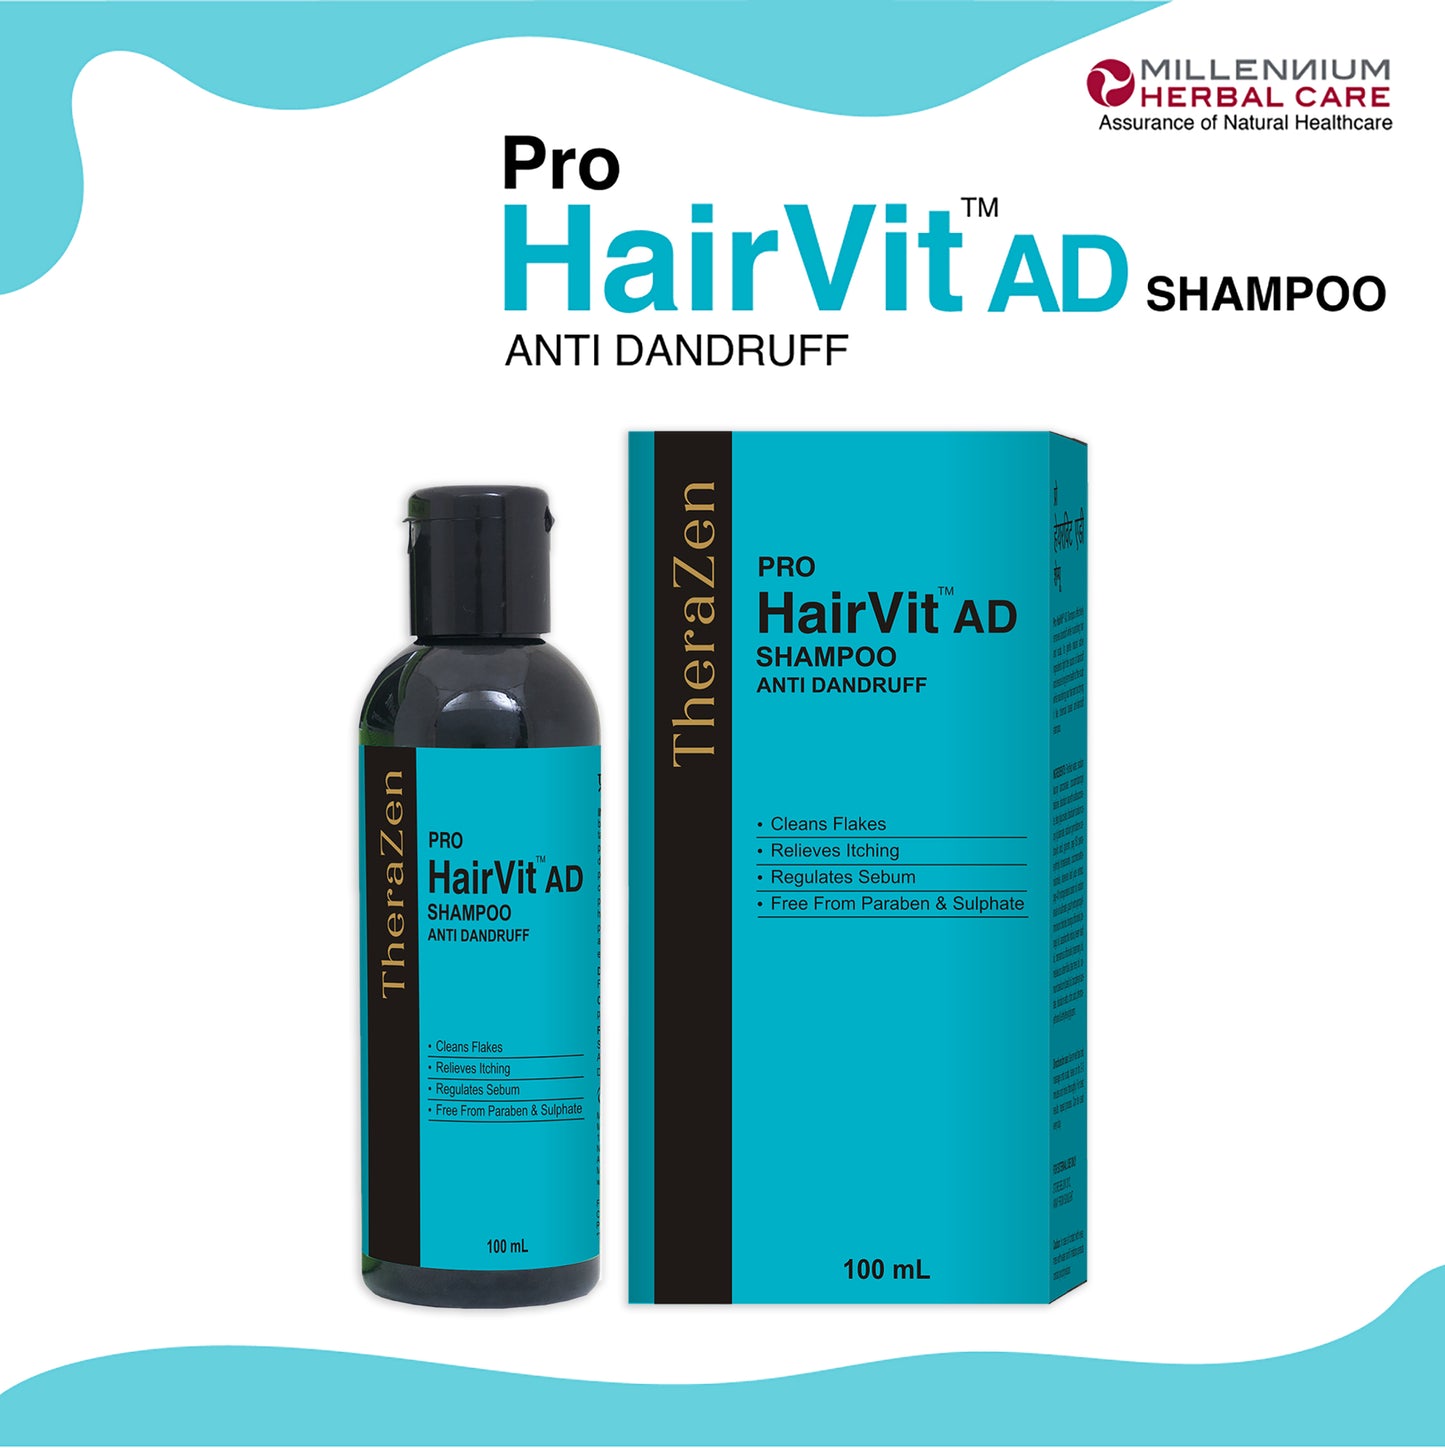 Front Image of Pro Hairvit AD Shampoo along with Packaging